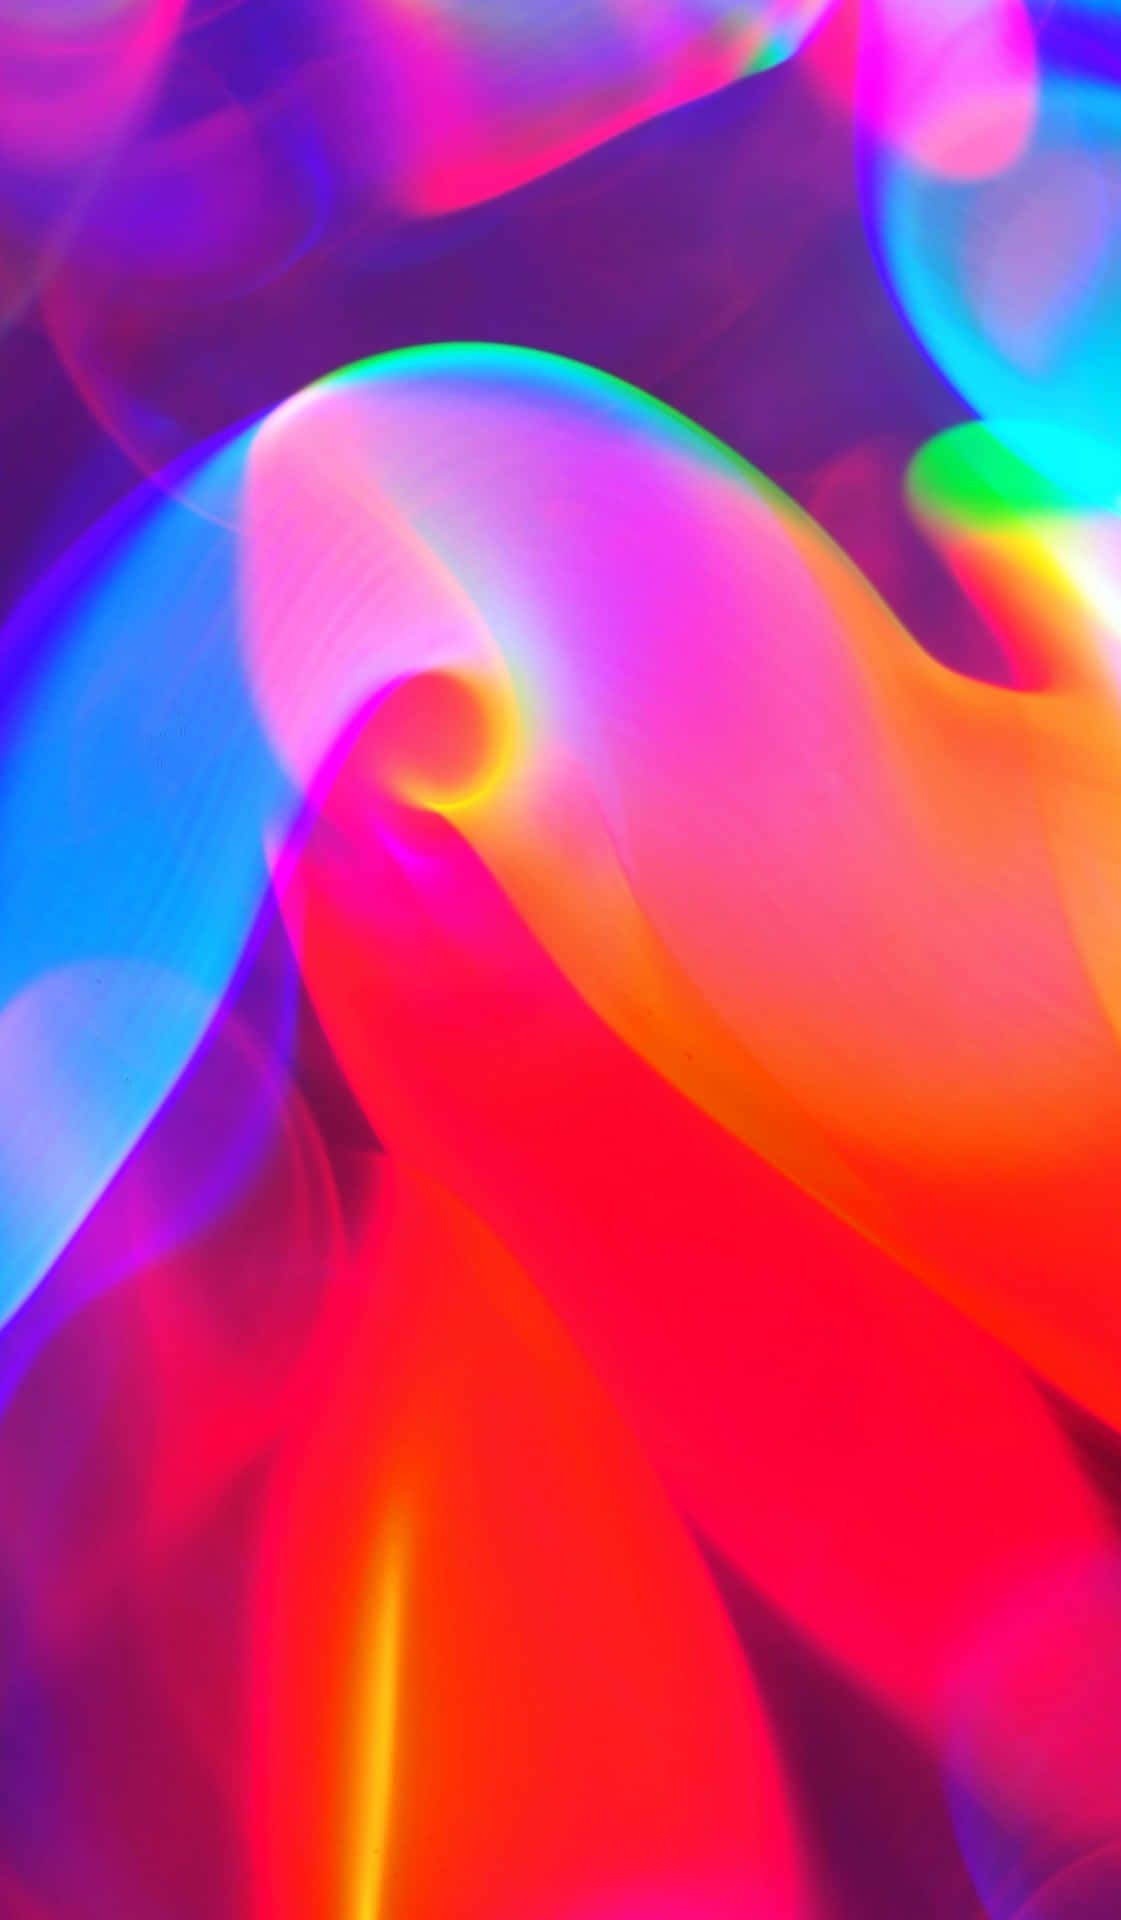 A colorful abstract image of light and shapes - Colorful